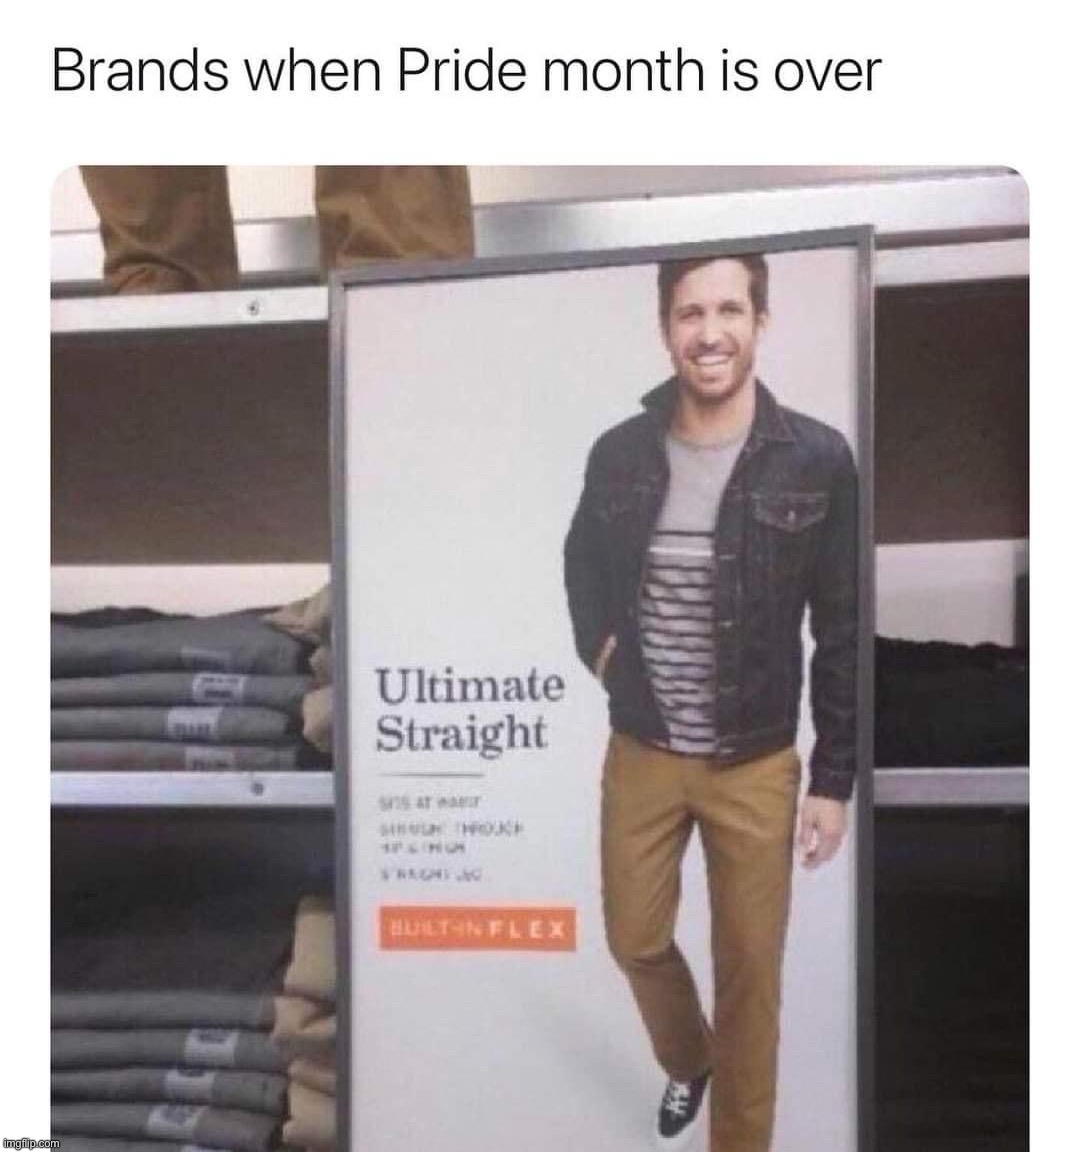 It really do be like that | image tagged in brands when pride month is over,pride,gay pride,straight,repost | made w/ Imgflip meme maker